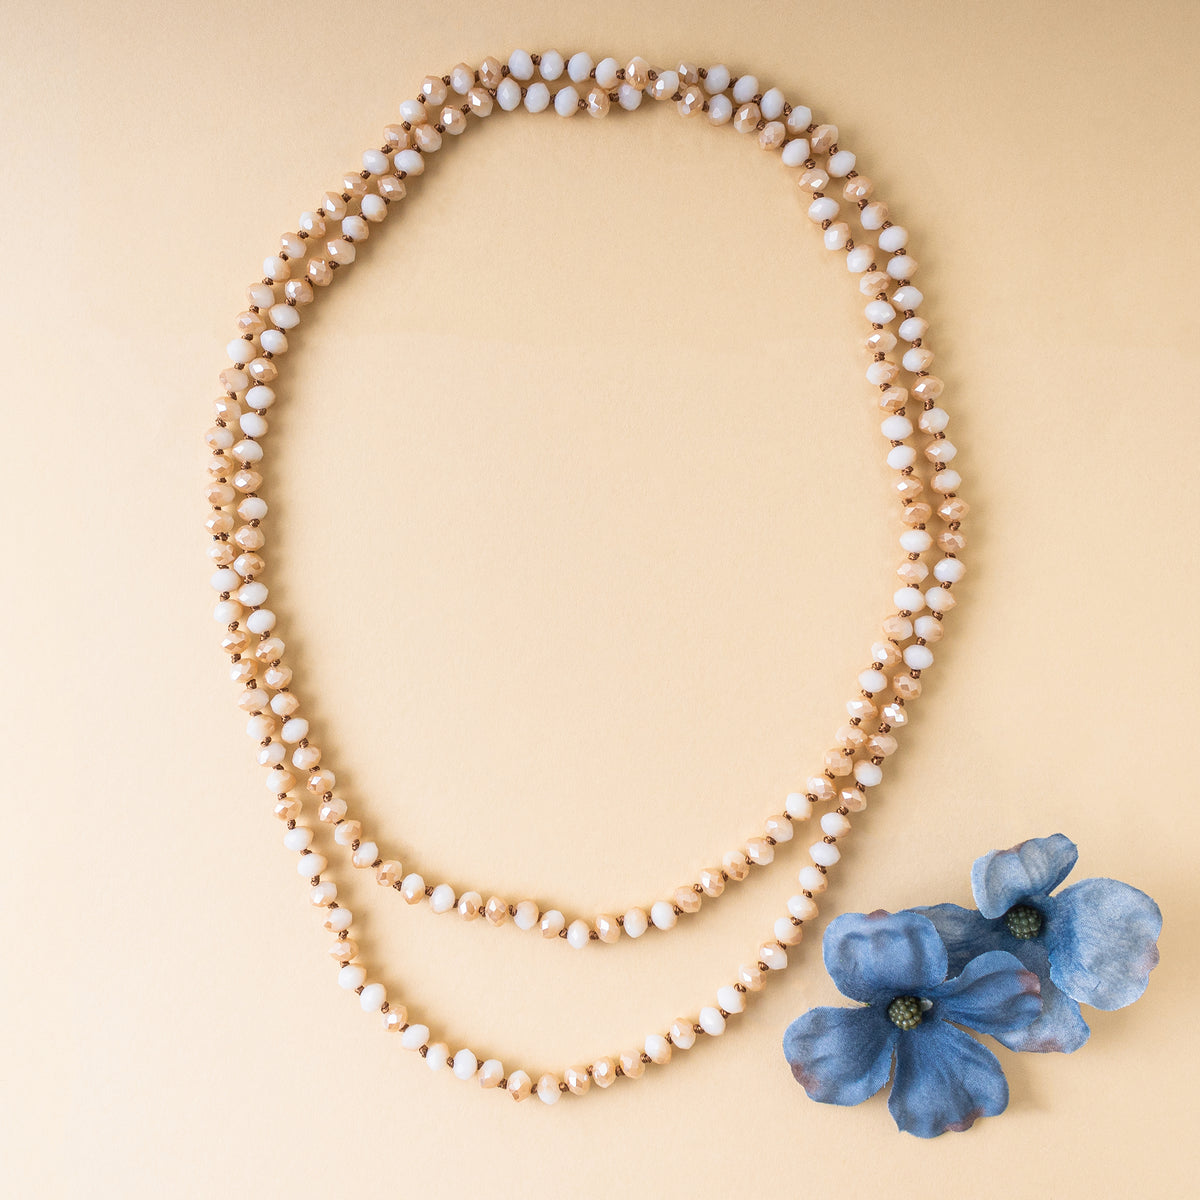 72028-13 - Crystal Beaded Necklace - Beige AB - Fashion Jewelry Wholesale